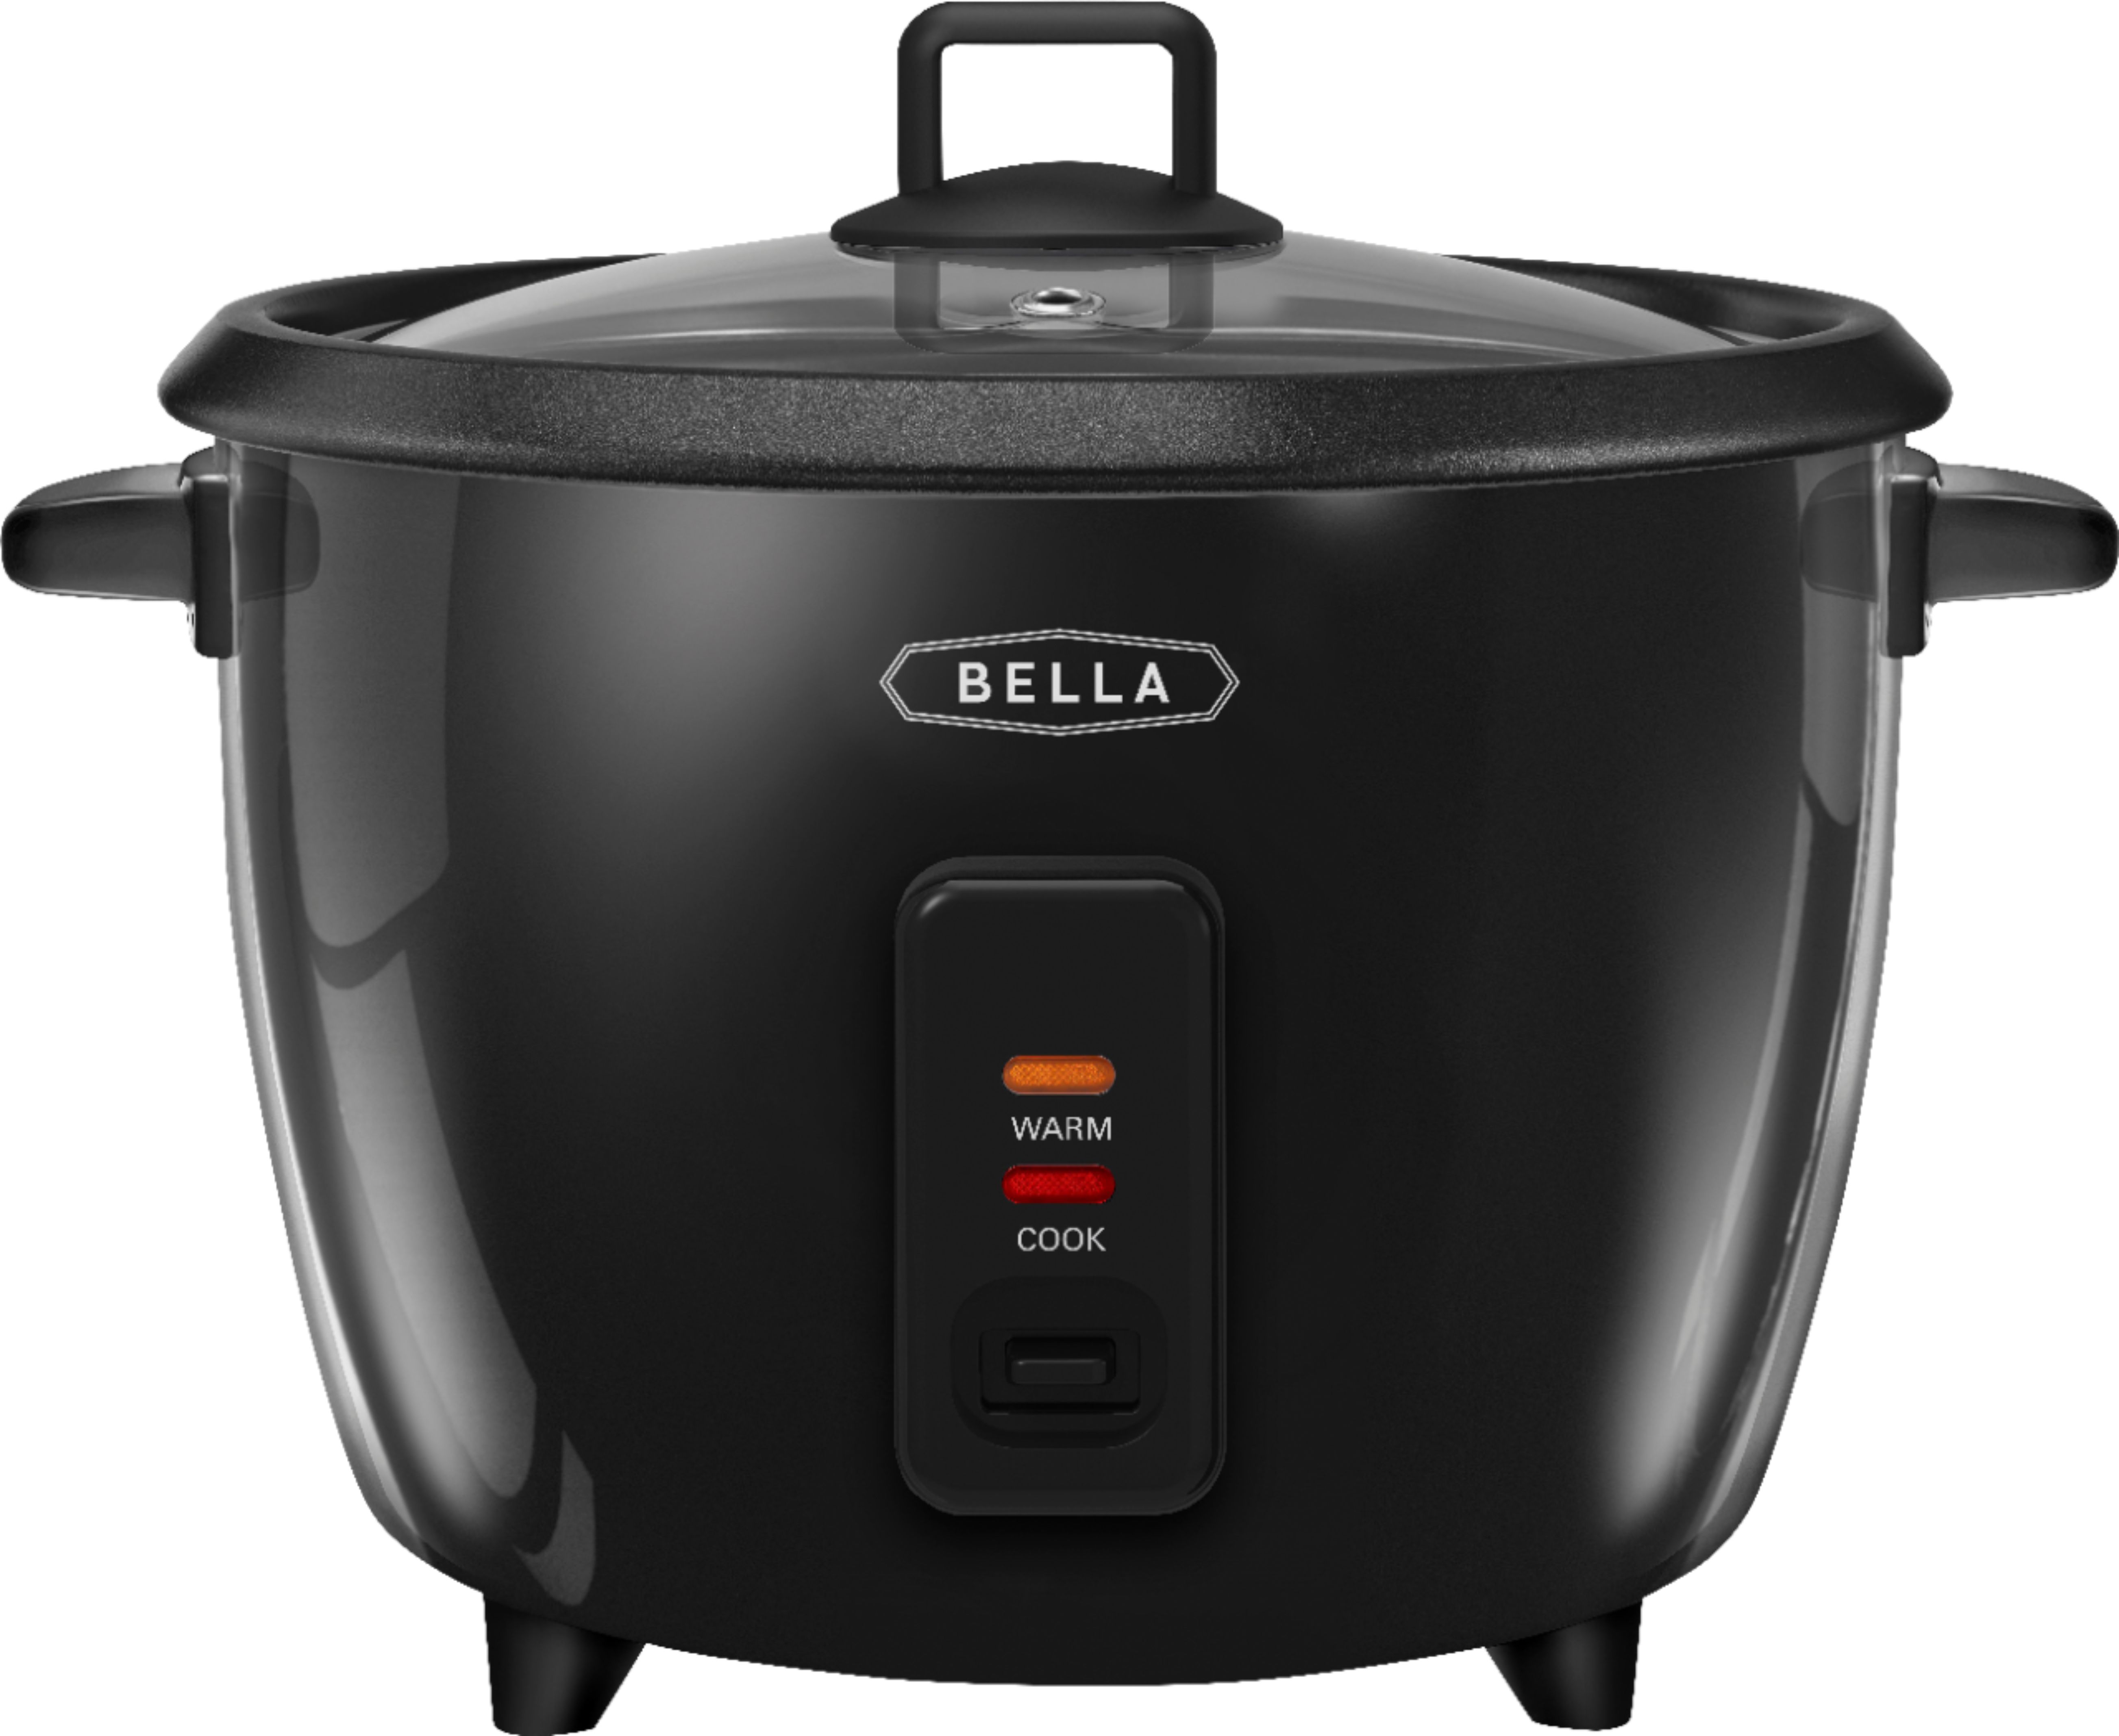 Angle View: Bella - 16-Cup Manual Rice Cooker - Black